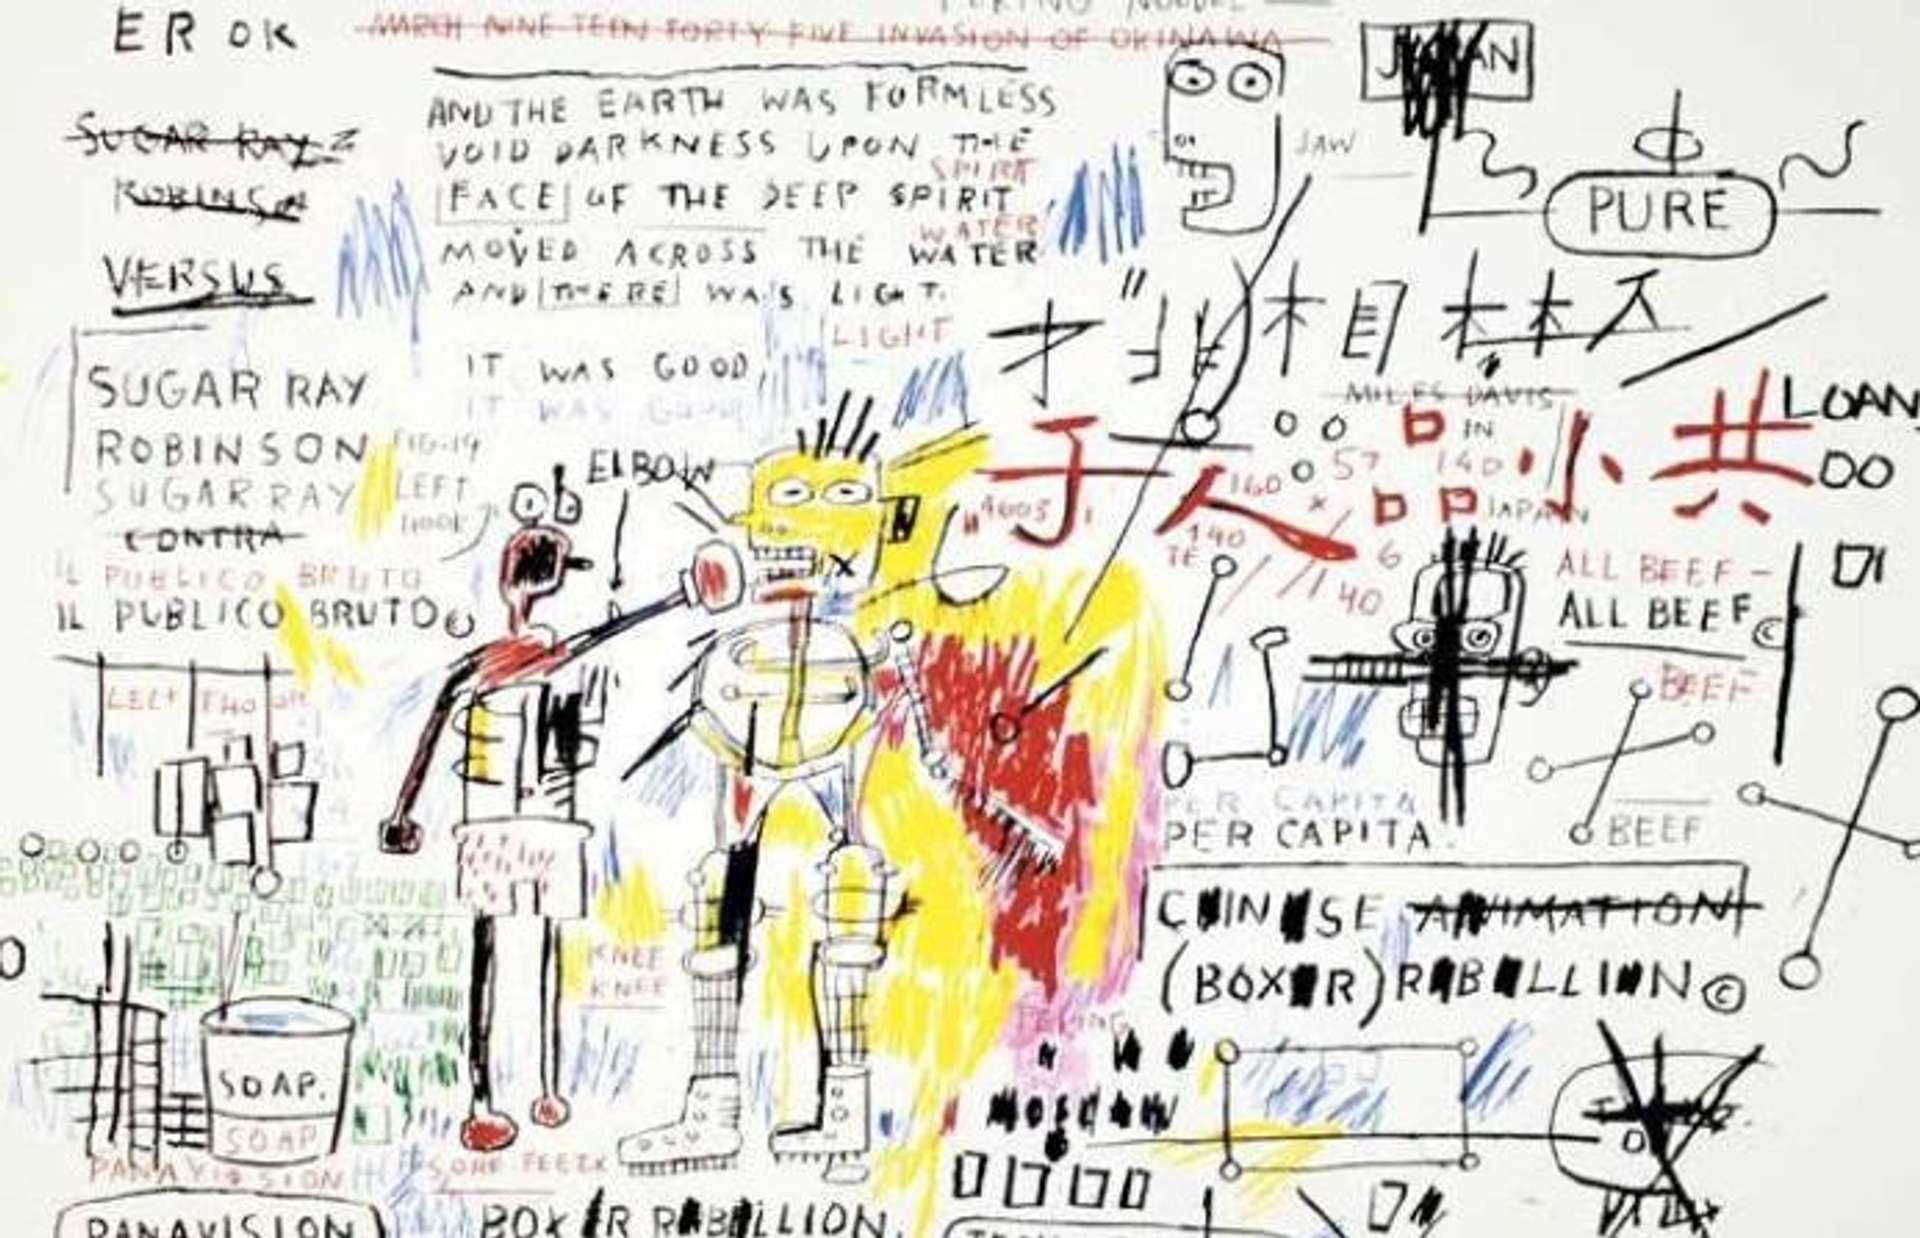  Jean-Michel Basquiat's Boxer Rebellion. A Neo Expressionist screenprint of two abstract figures boxing in the centre of a white background with various texts and characters.